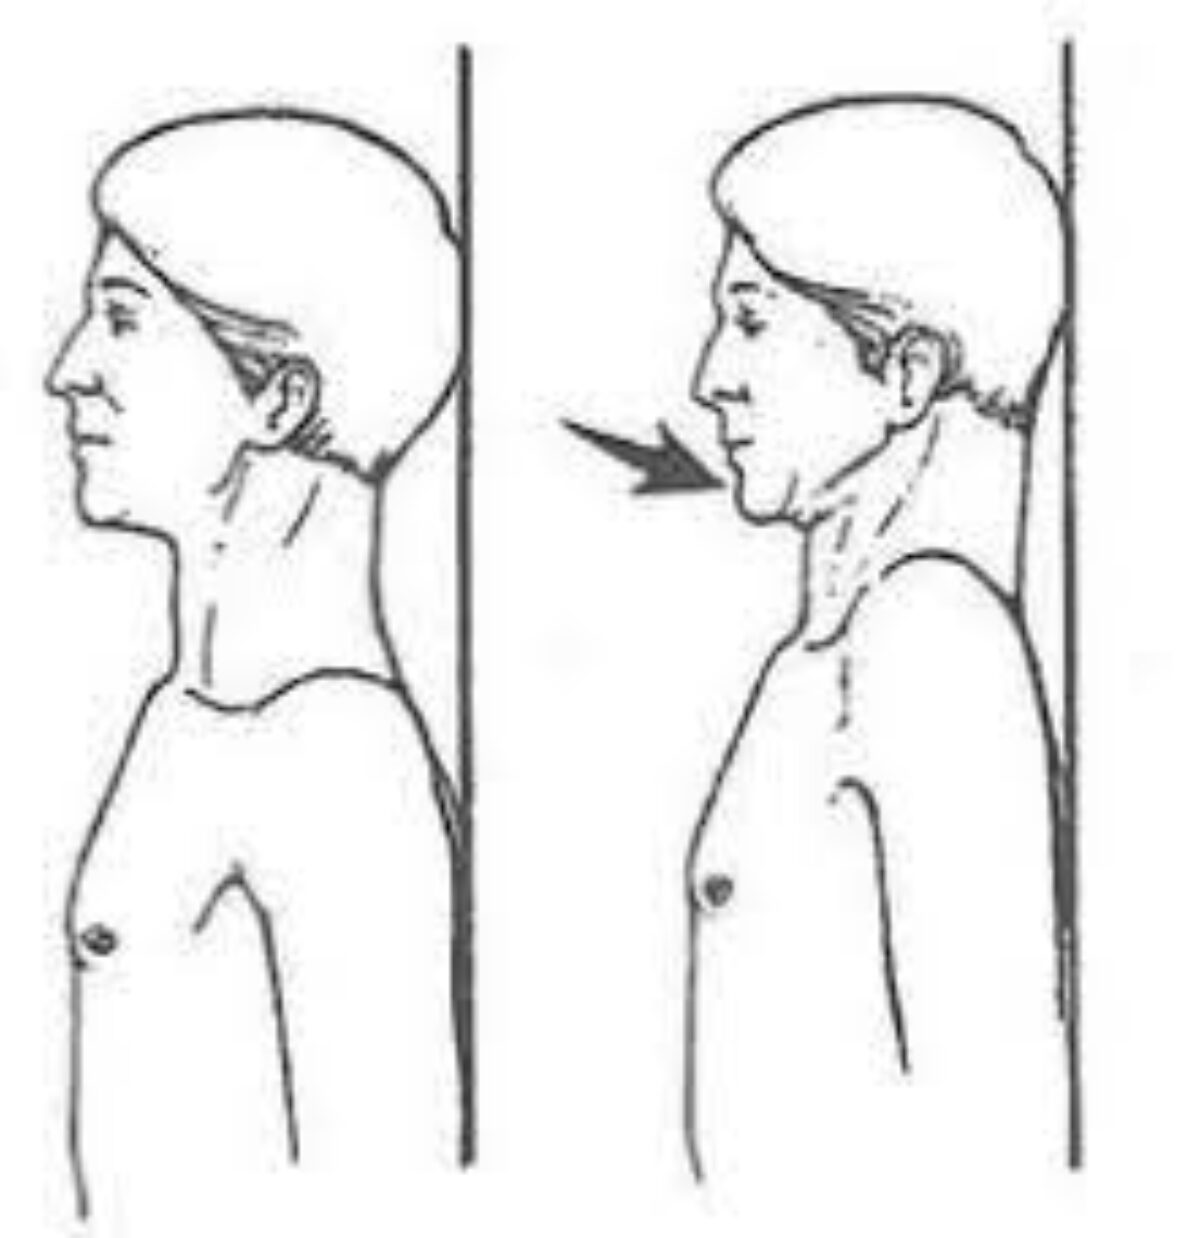 Chin Tucks: Tips and Recommended Variations